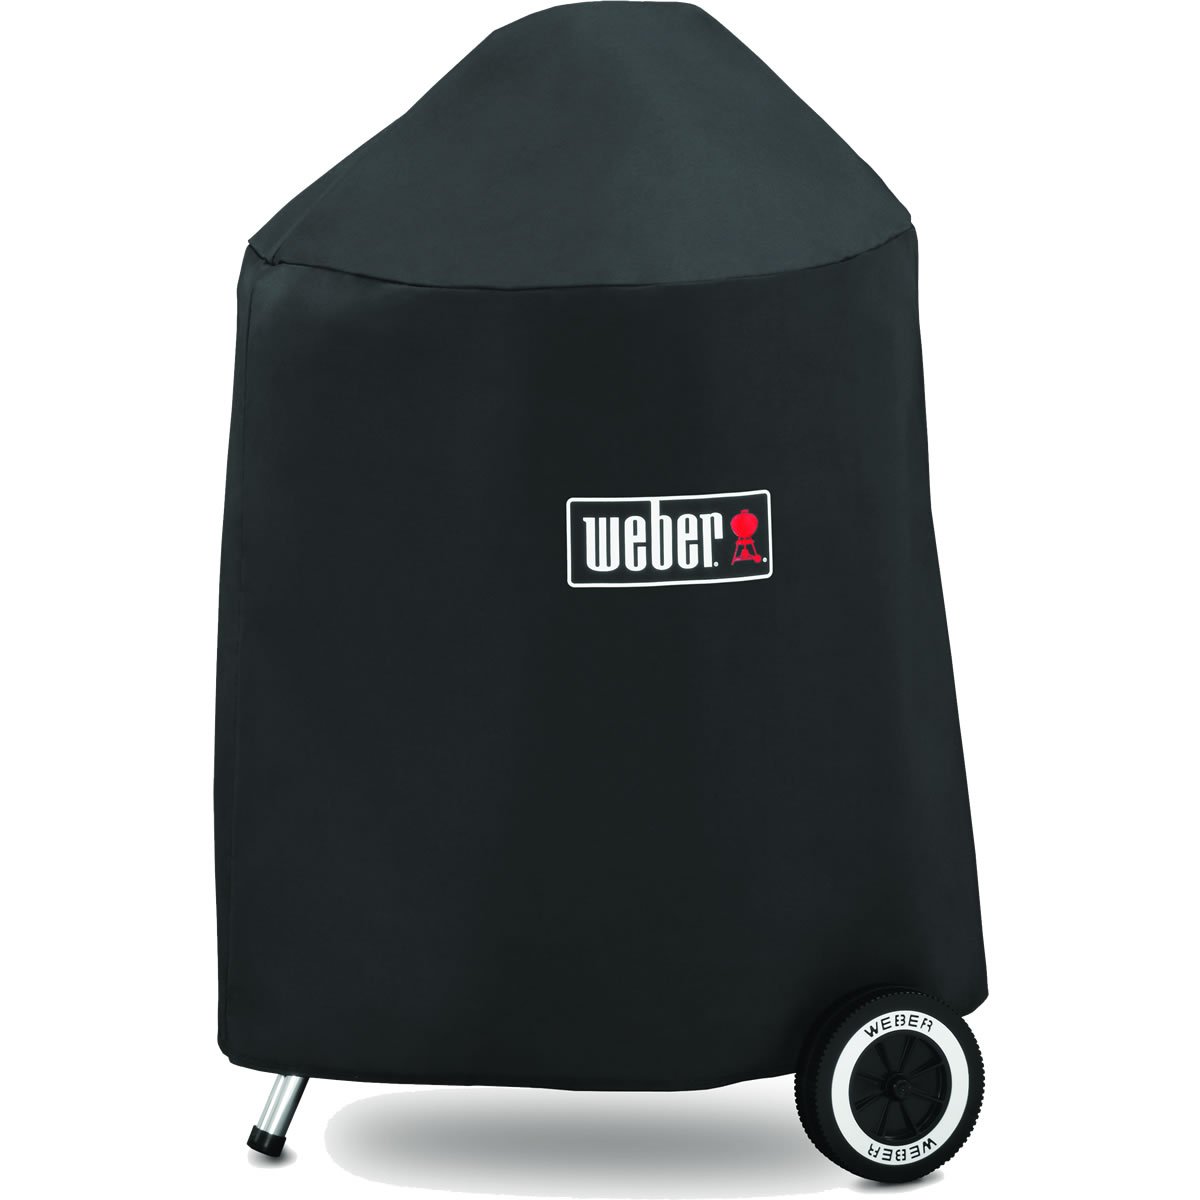 Weber Premium Barbecue Cover Fits 47cm charcoal barbecues 7141